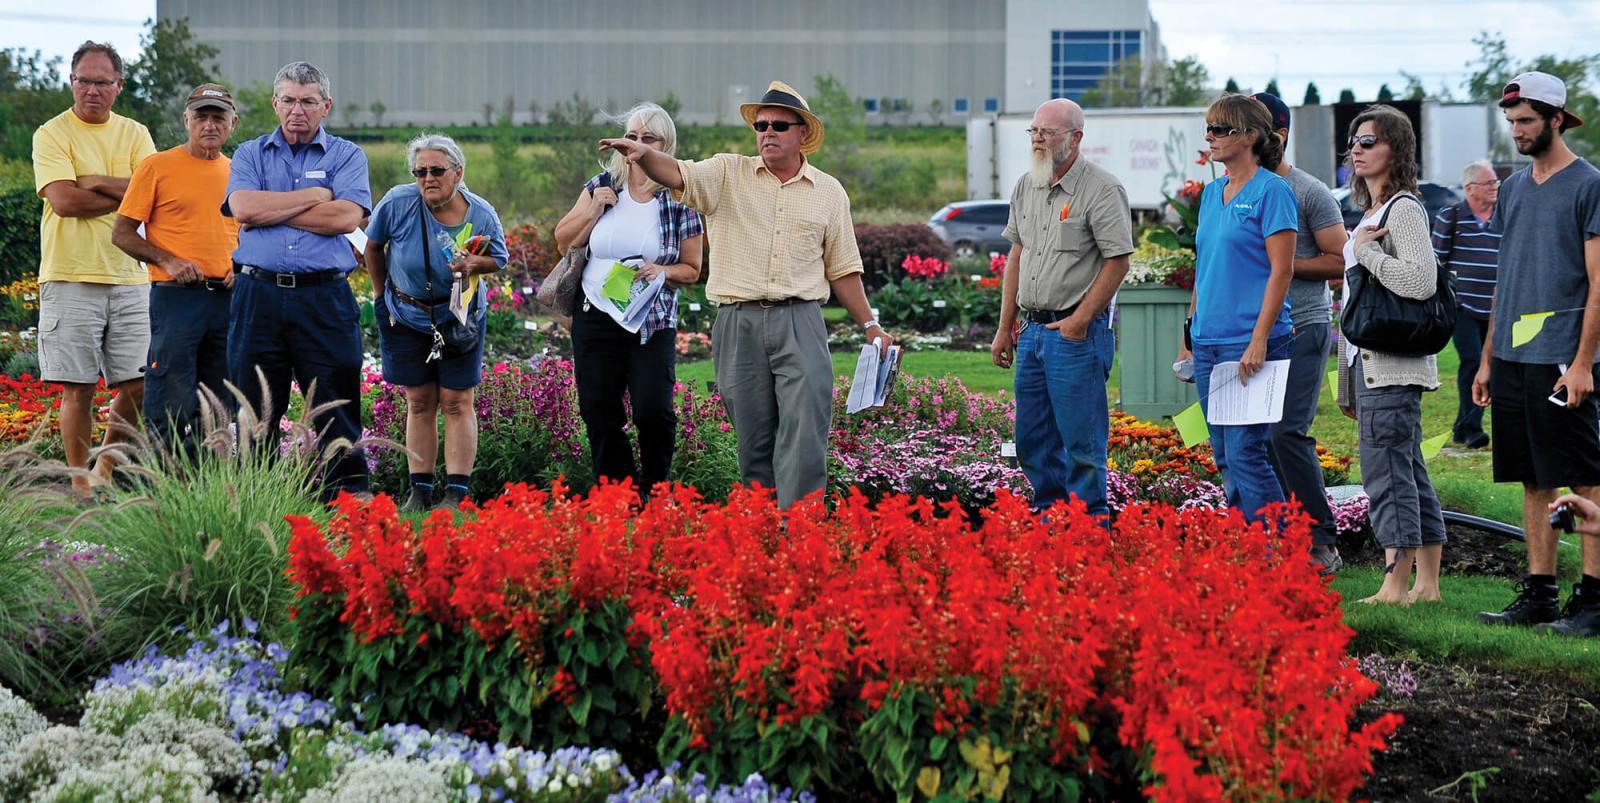 Over 70 people attended this year’s trial garden open house for advice and information on the newest crop of ornamentals.